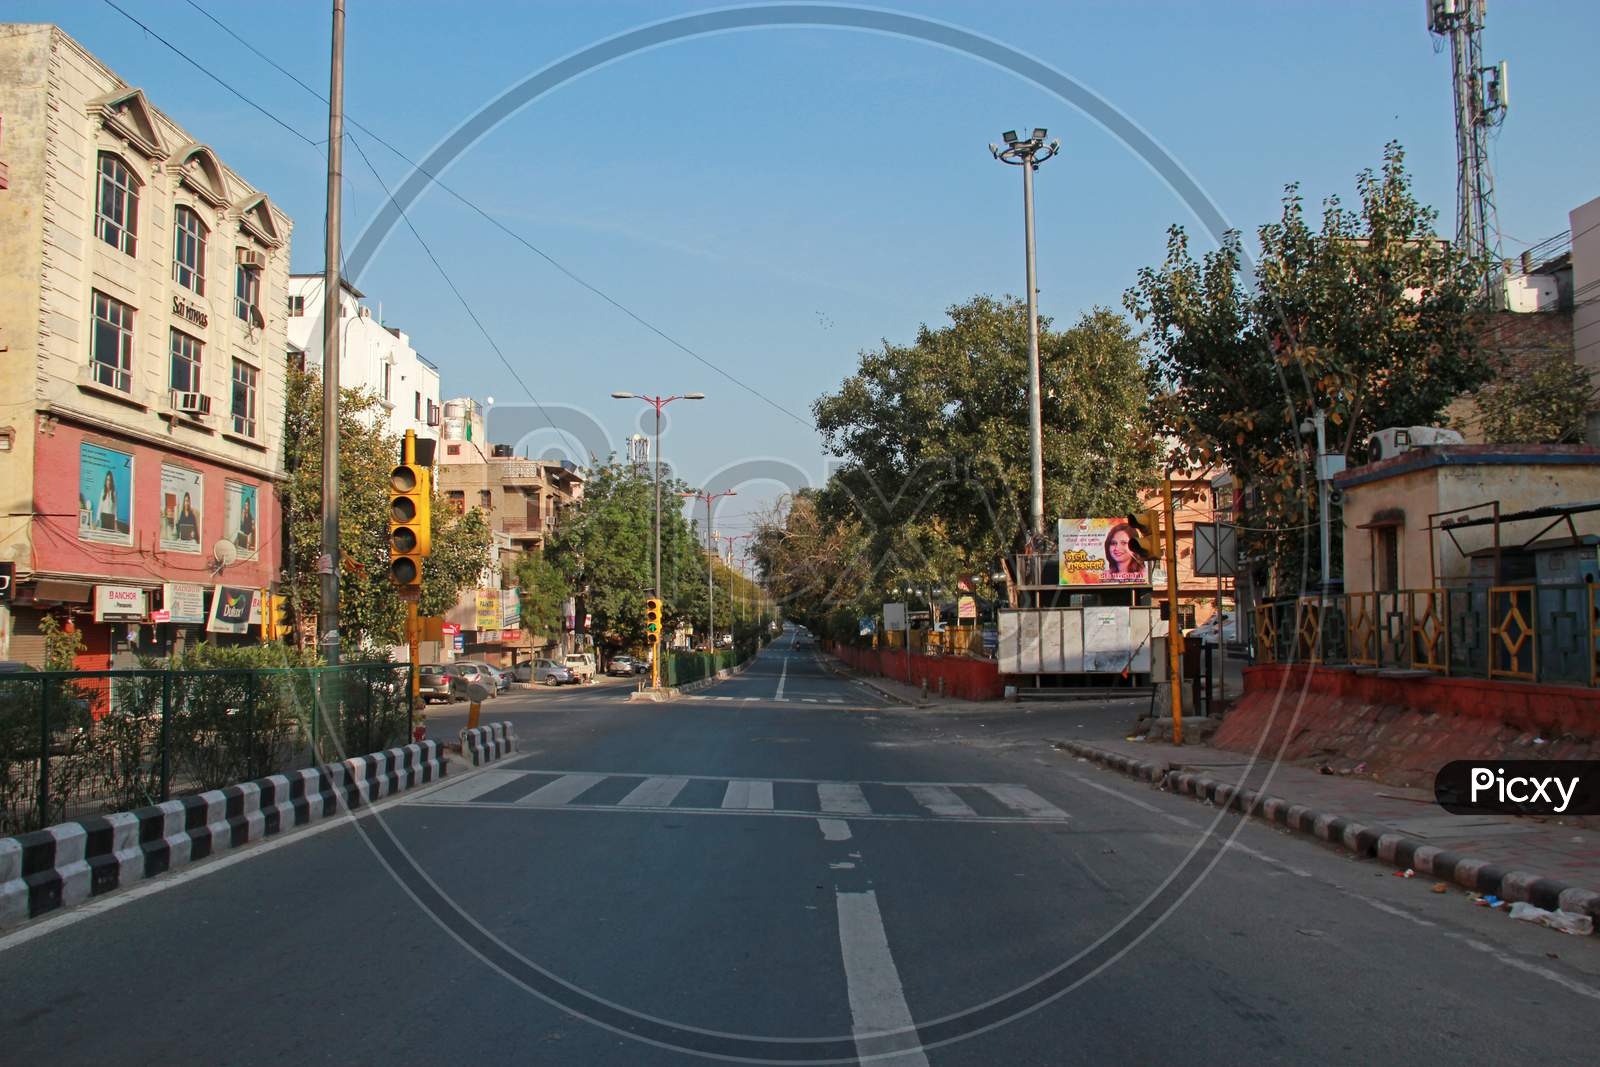 Janata Curfew, Deserted Roads in Delhi As Indian Prime Minister Narendra Modi Called For A 14 Hour Janta Curfew Or Self-Imposed Quarantine To Break The Highly Contagious Covid 19 Or Corona Virus Spread